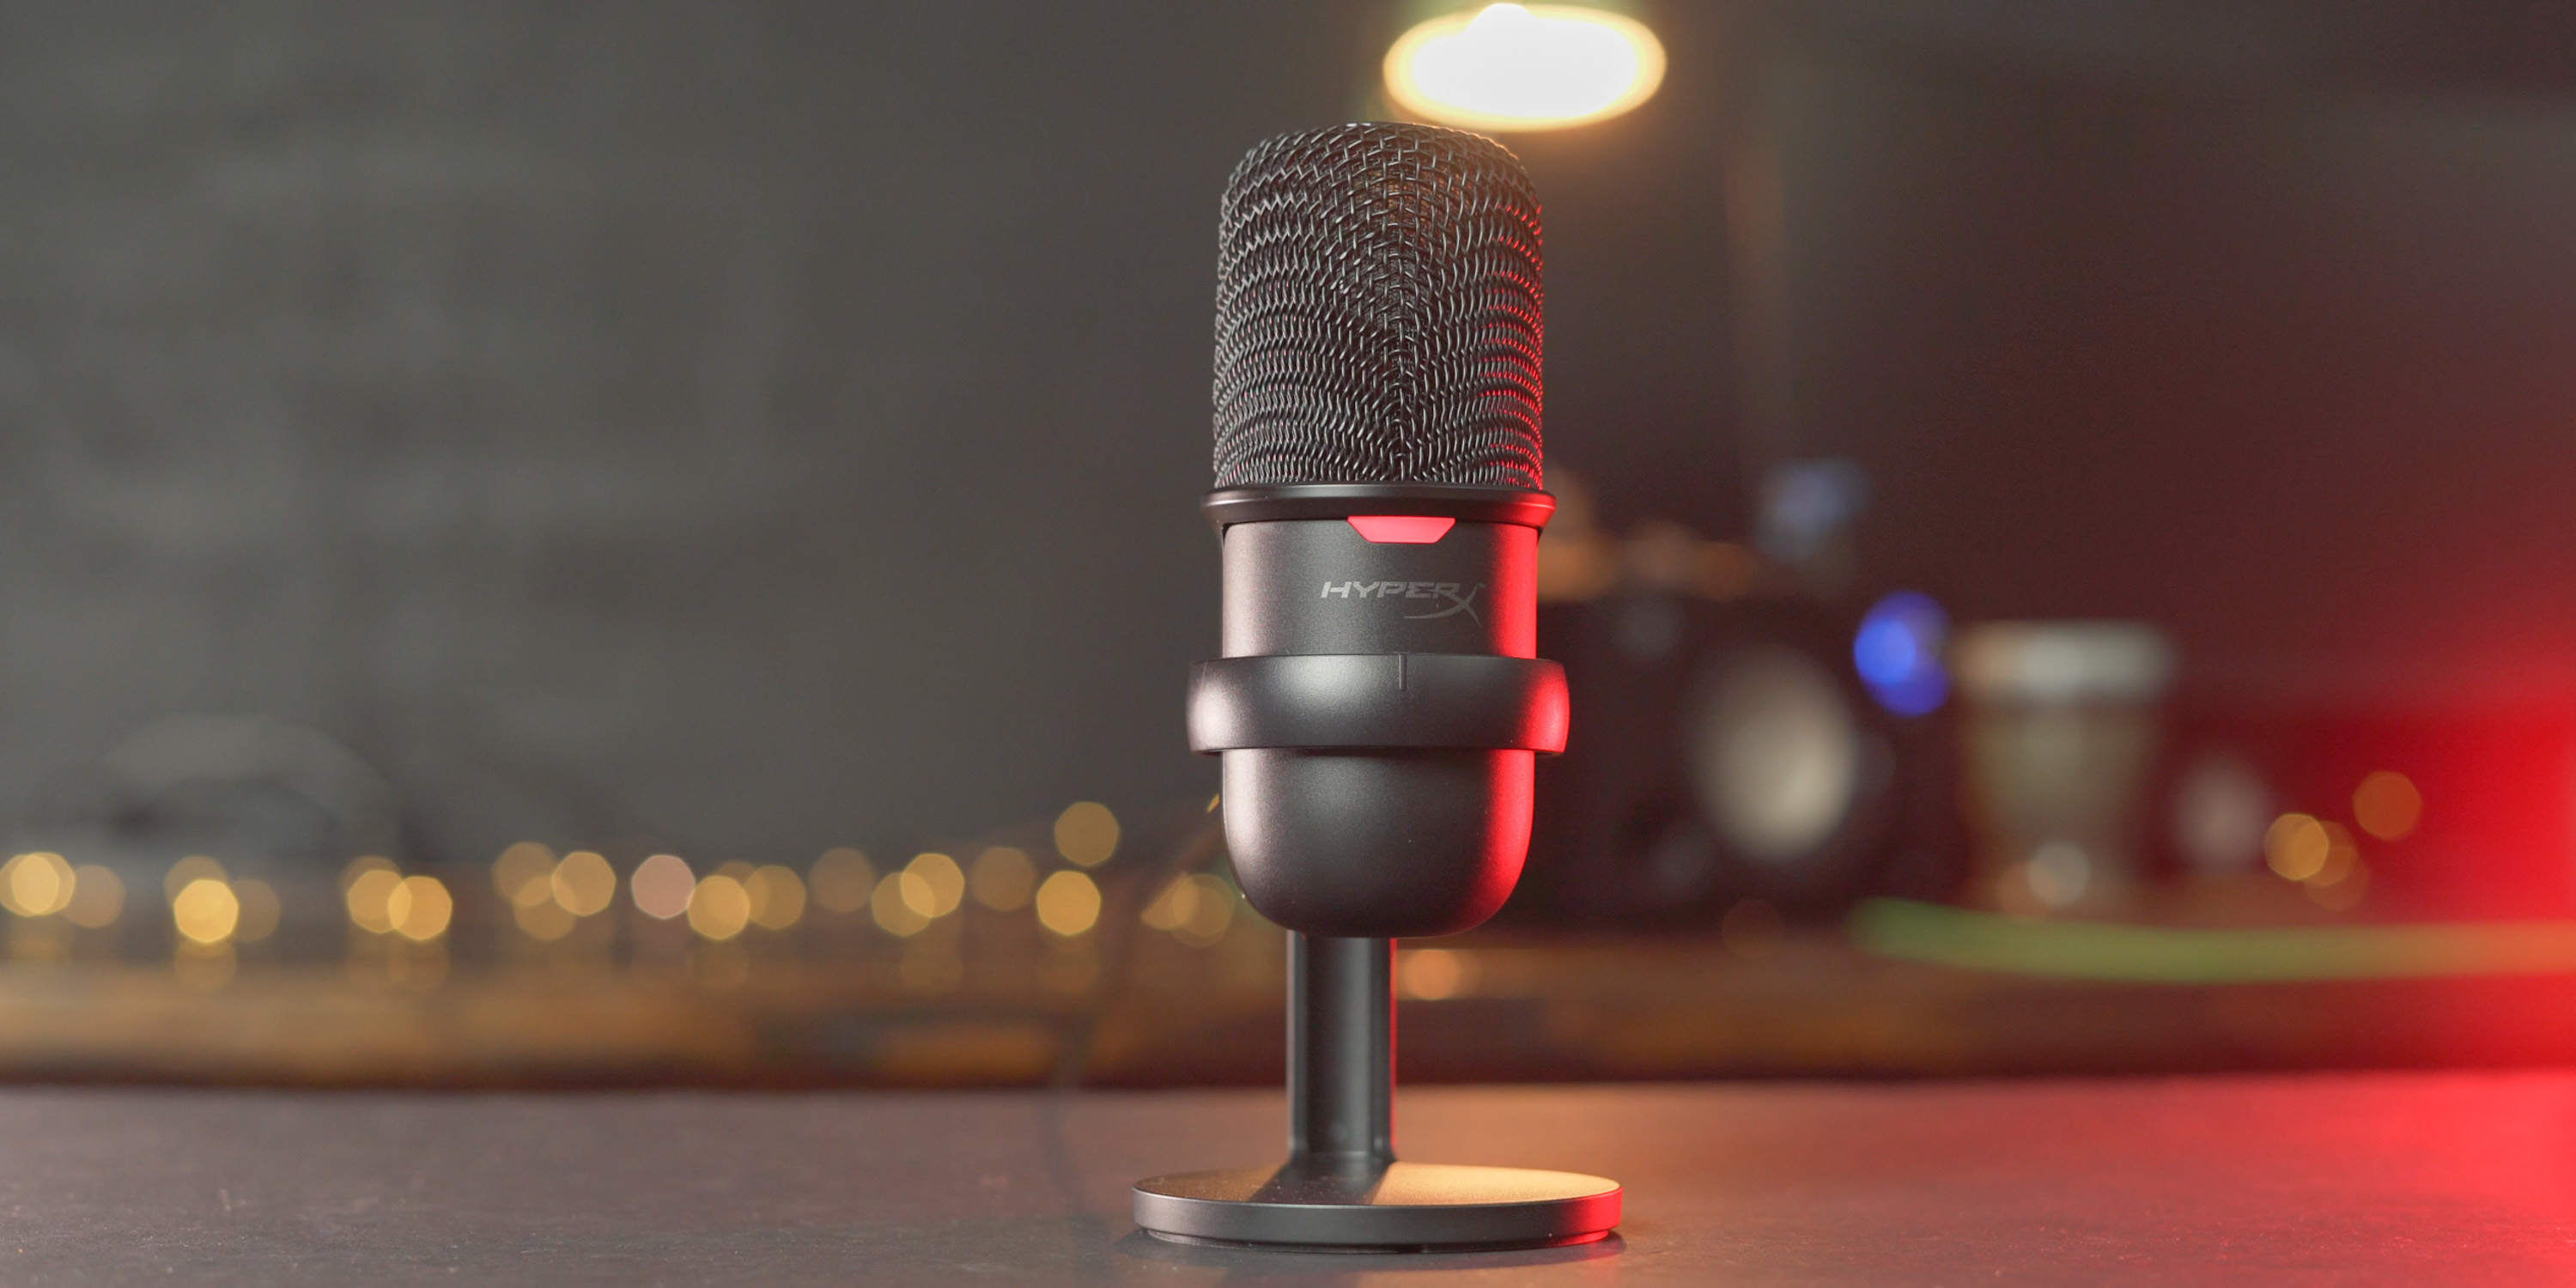 HyperX Solocast review: A perfect microphone for budding content creators